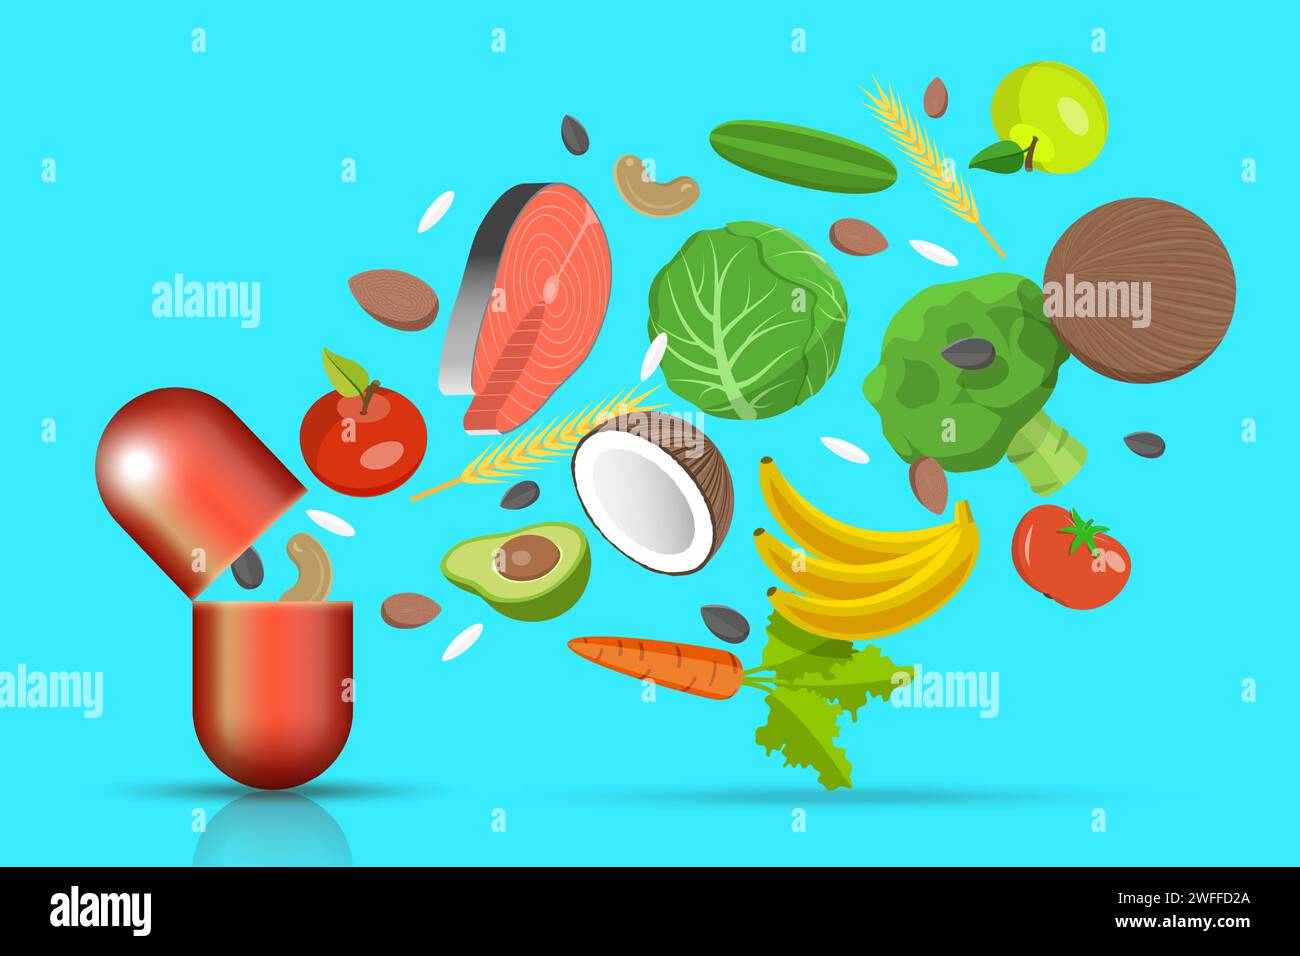 Nutritional Supplement, Vitamins and Dietary Supplements. 3D Isometric Flat Vector Conceptual Illustration. Stock Vector